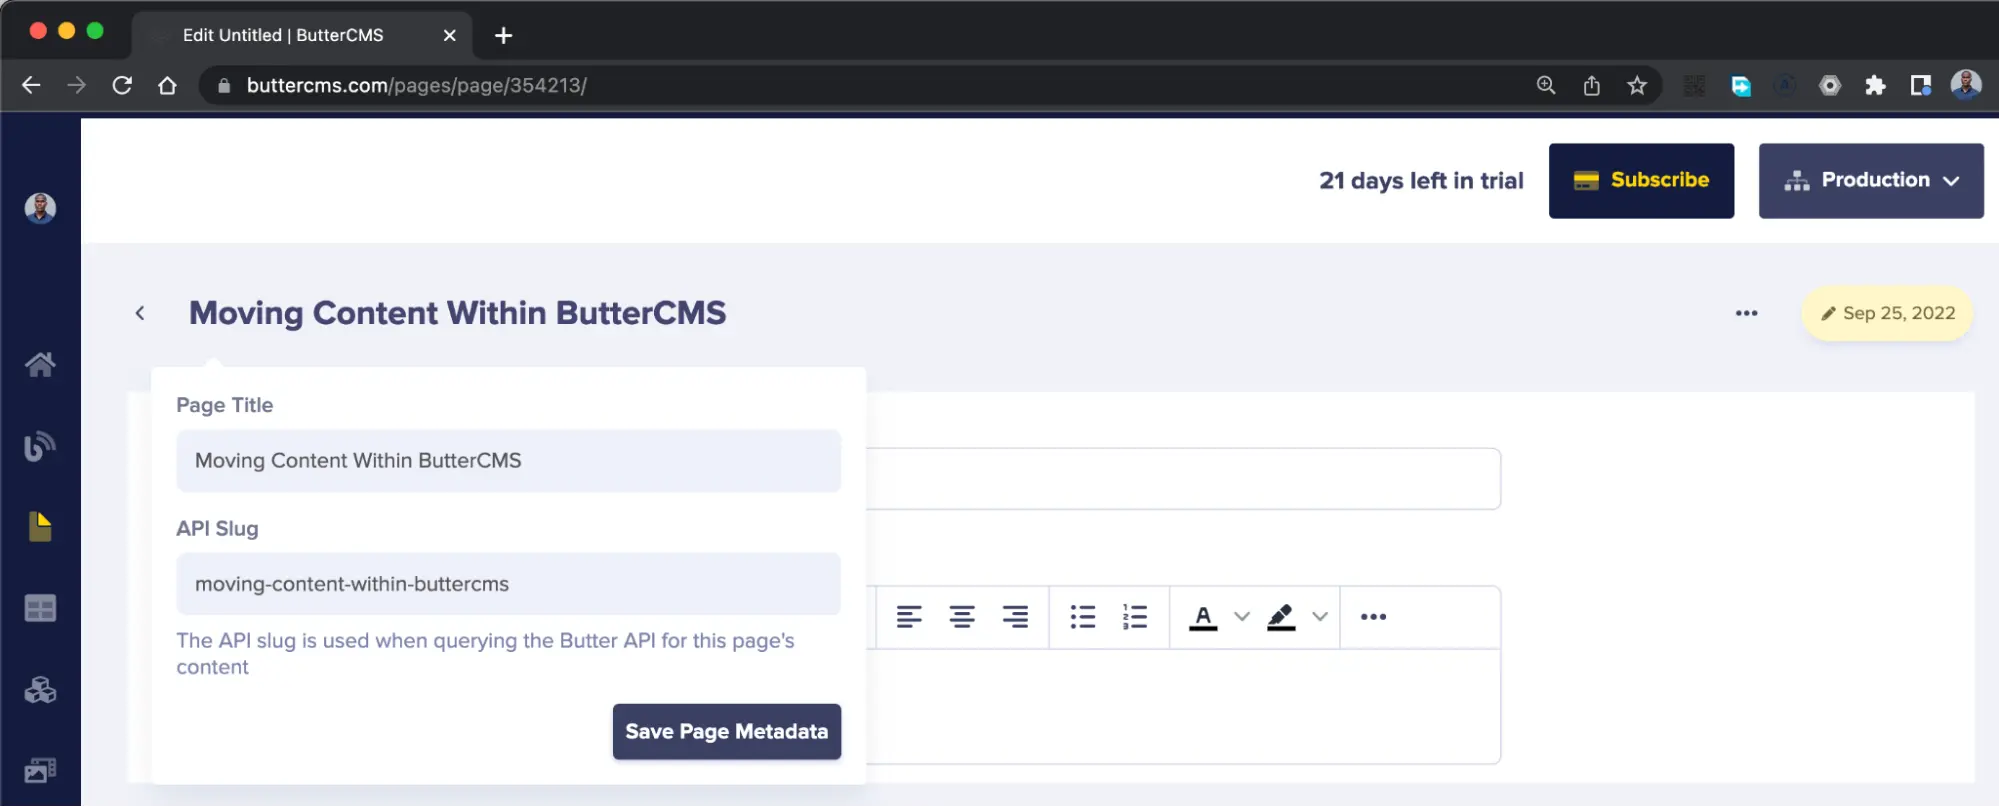 Fill in meta data for Moving Content Within ButterCMS kb article page